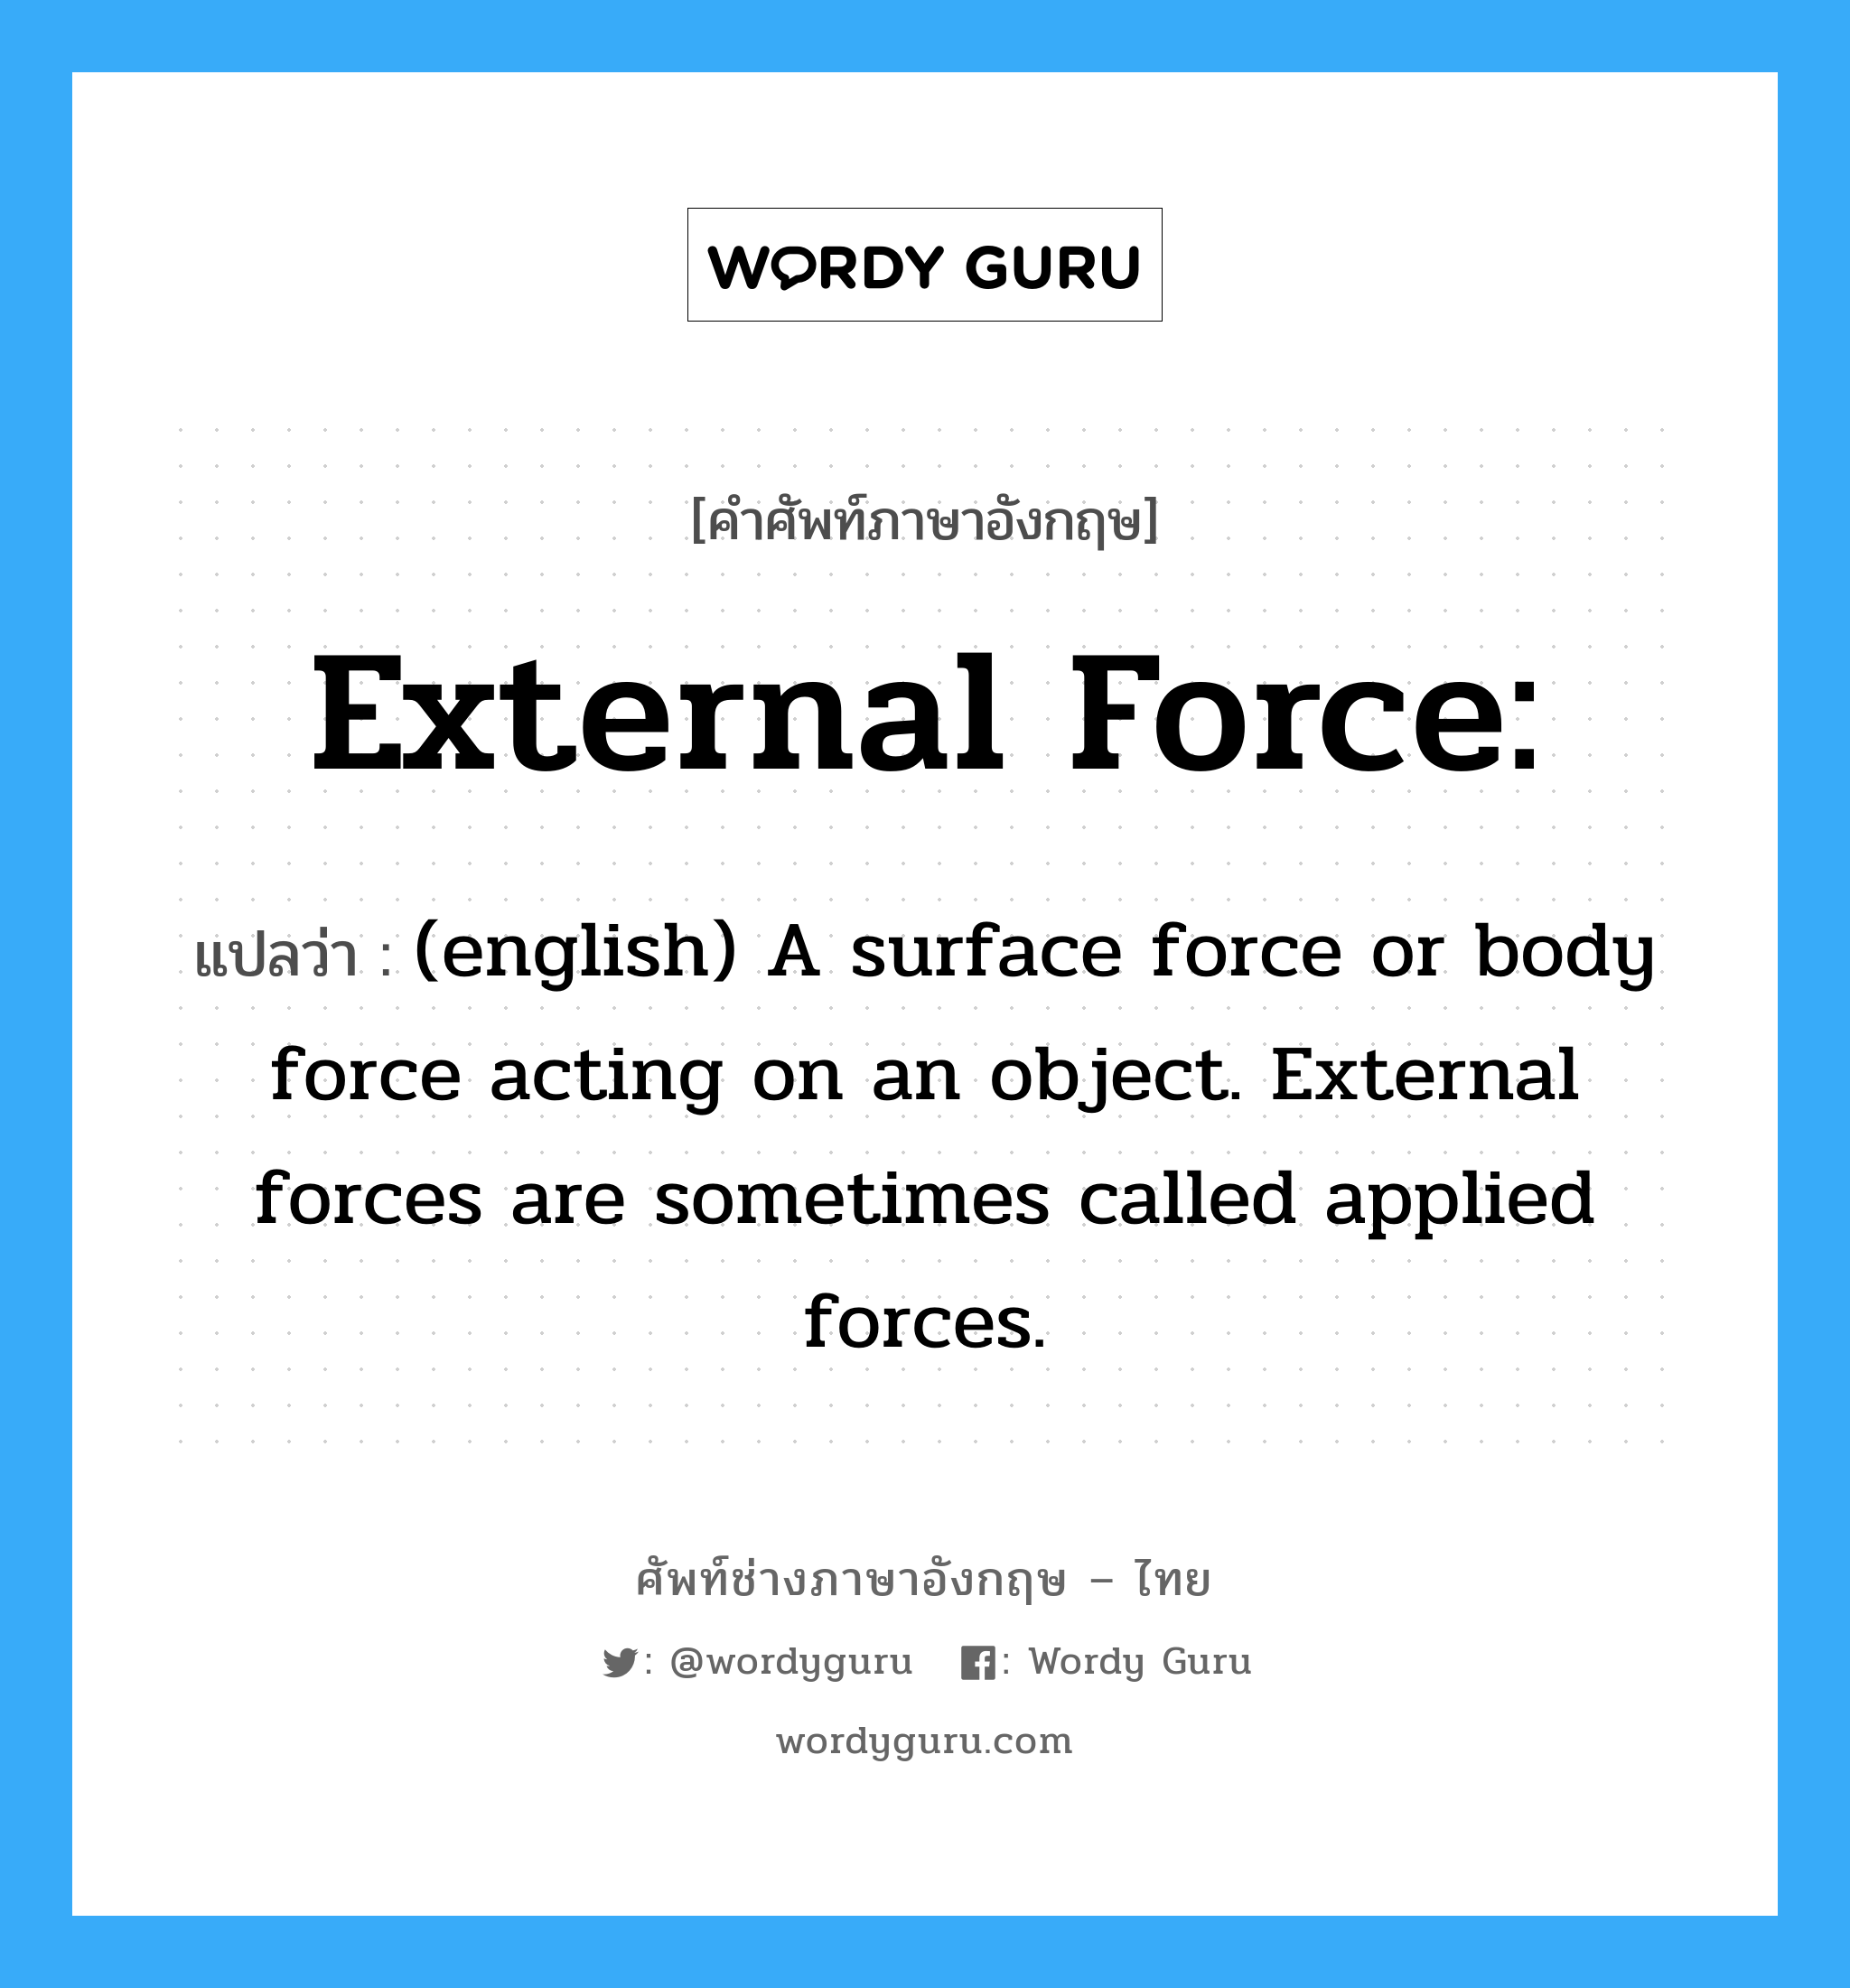 (english) A surface force or body force acting on an object. External forces are sometimes called applied forces. ภาษาอังกฤษ?, คำศัพท์ช่างภาษาอังกฤษ - ไทย (english) A surface force or body force acting on an object. External forces are sometimes called applied forces. คำศัพท์ภาษาอังกฤษ (english) A surface force or body force acting on an object. External forces are sometimes called applied forces. แปลว่า External force: